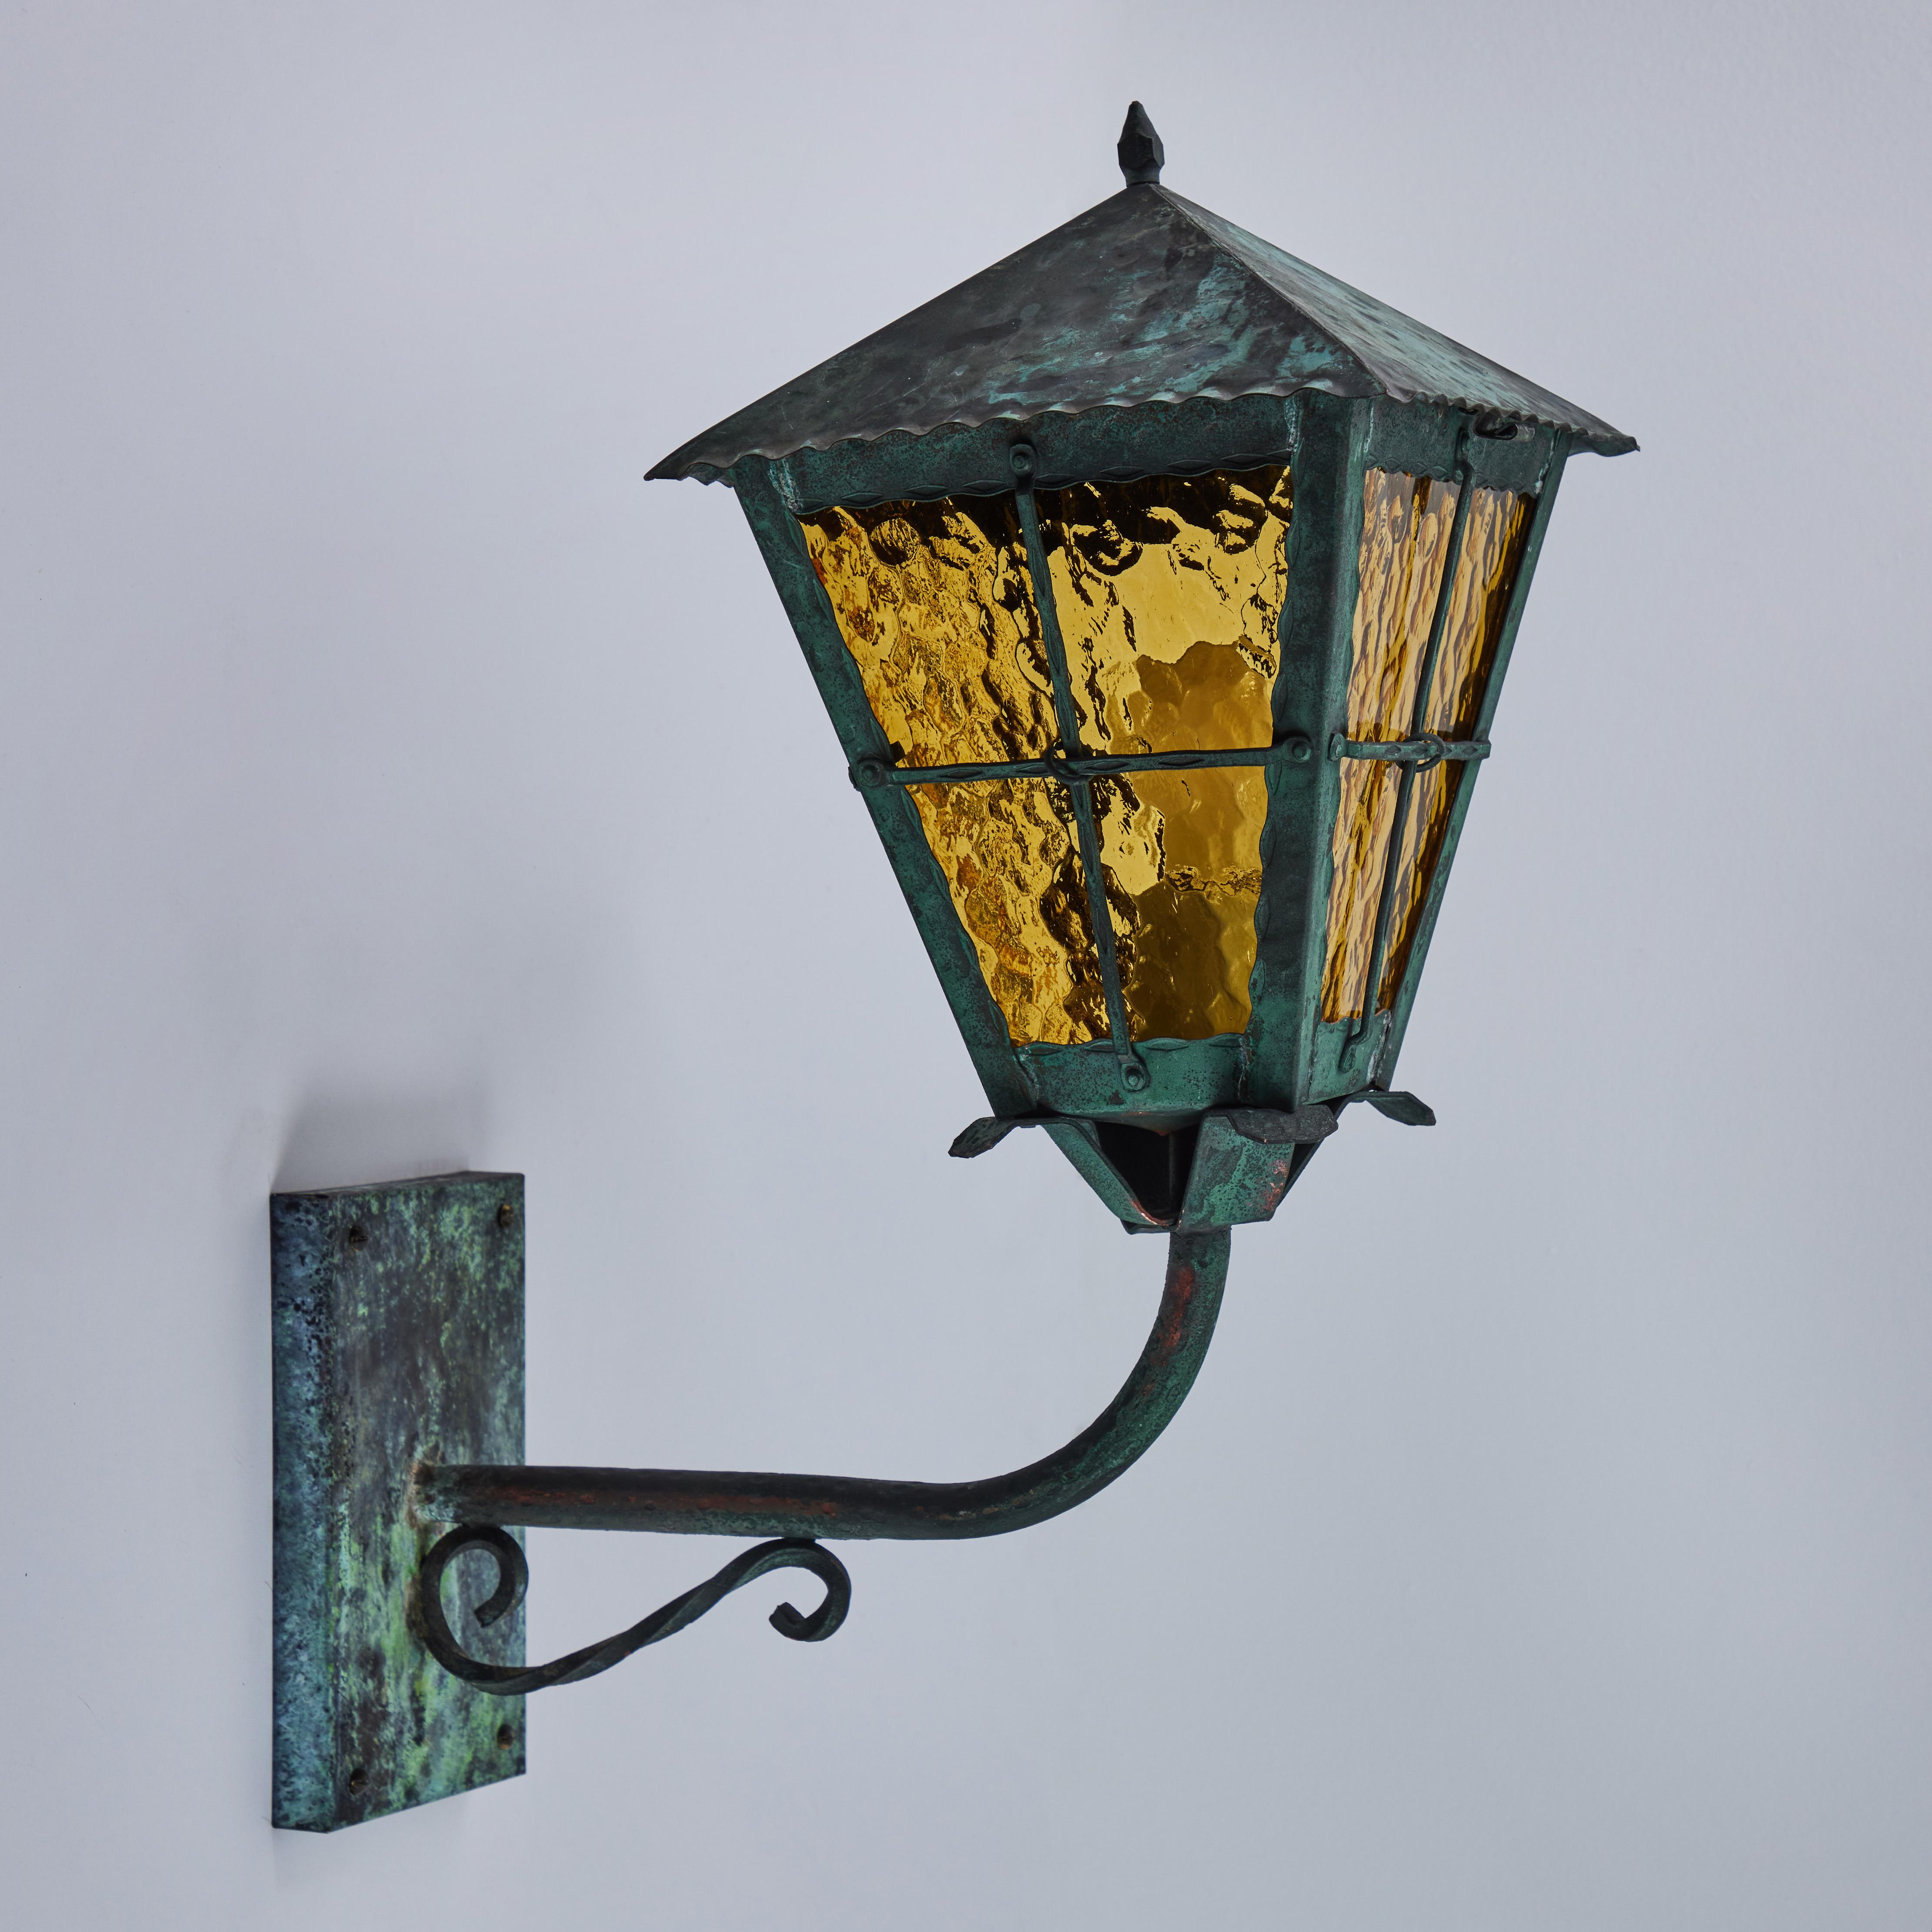 1950s Large Scandinavian Outdoor Wall Light in Patinated Copper and Amber Glass For Sale 2